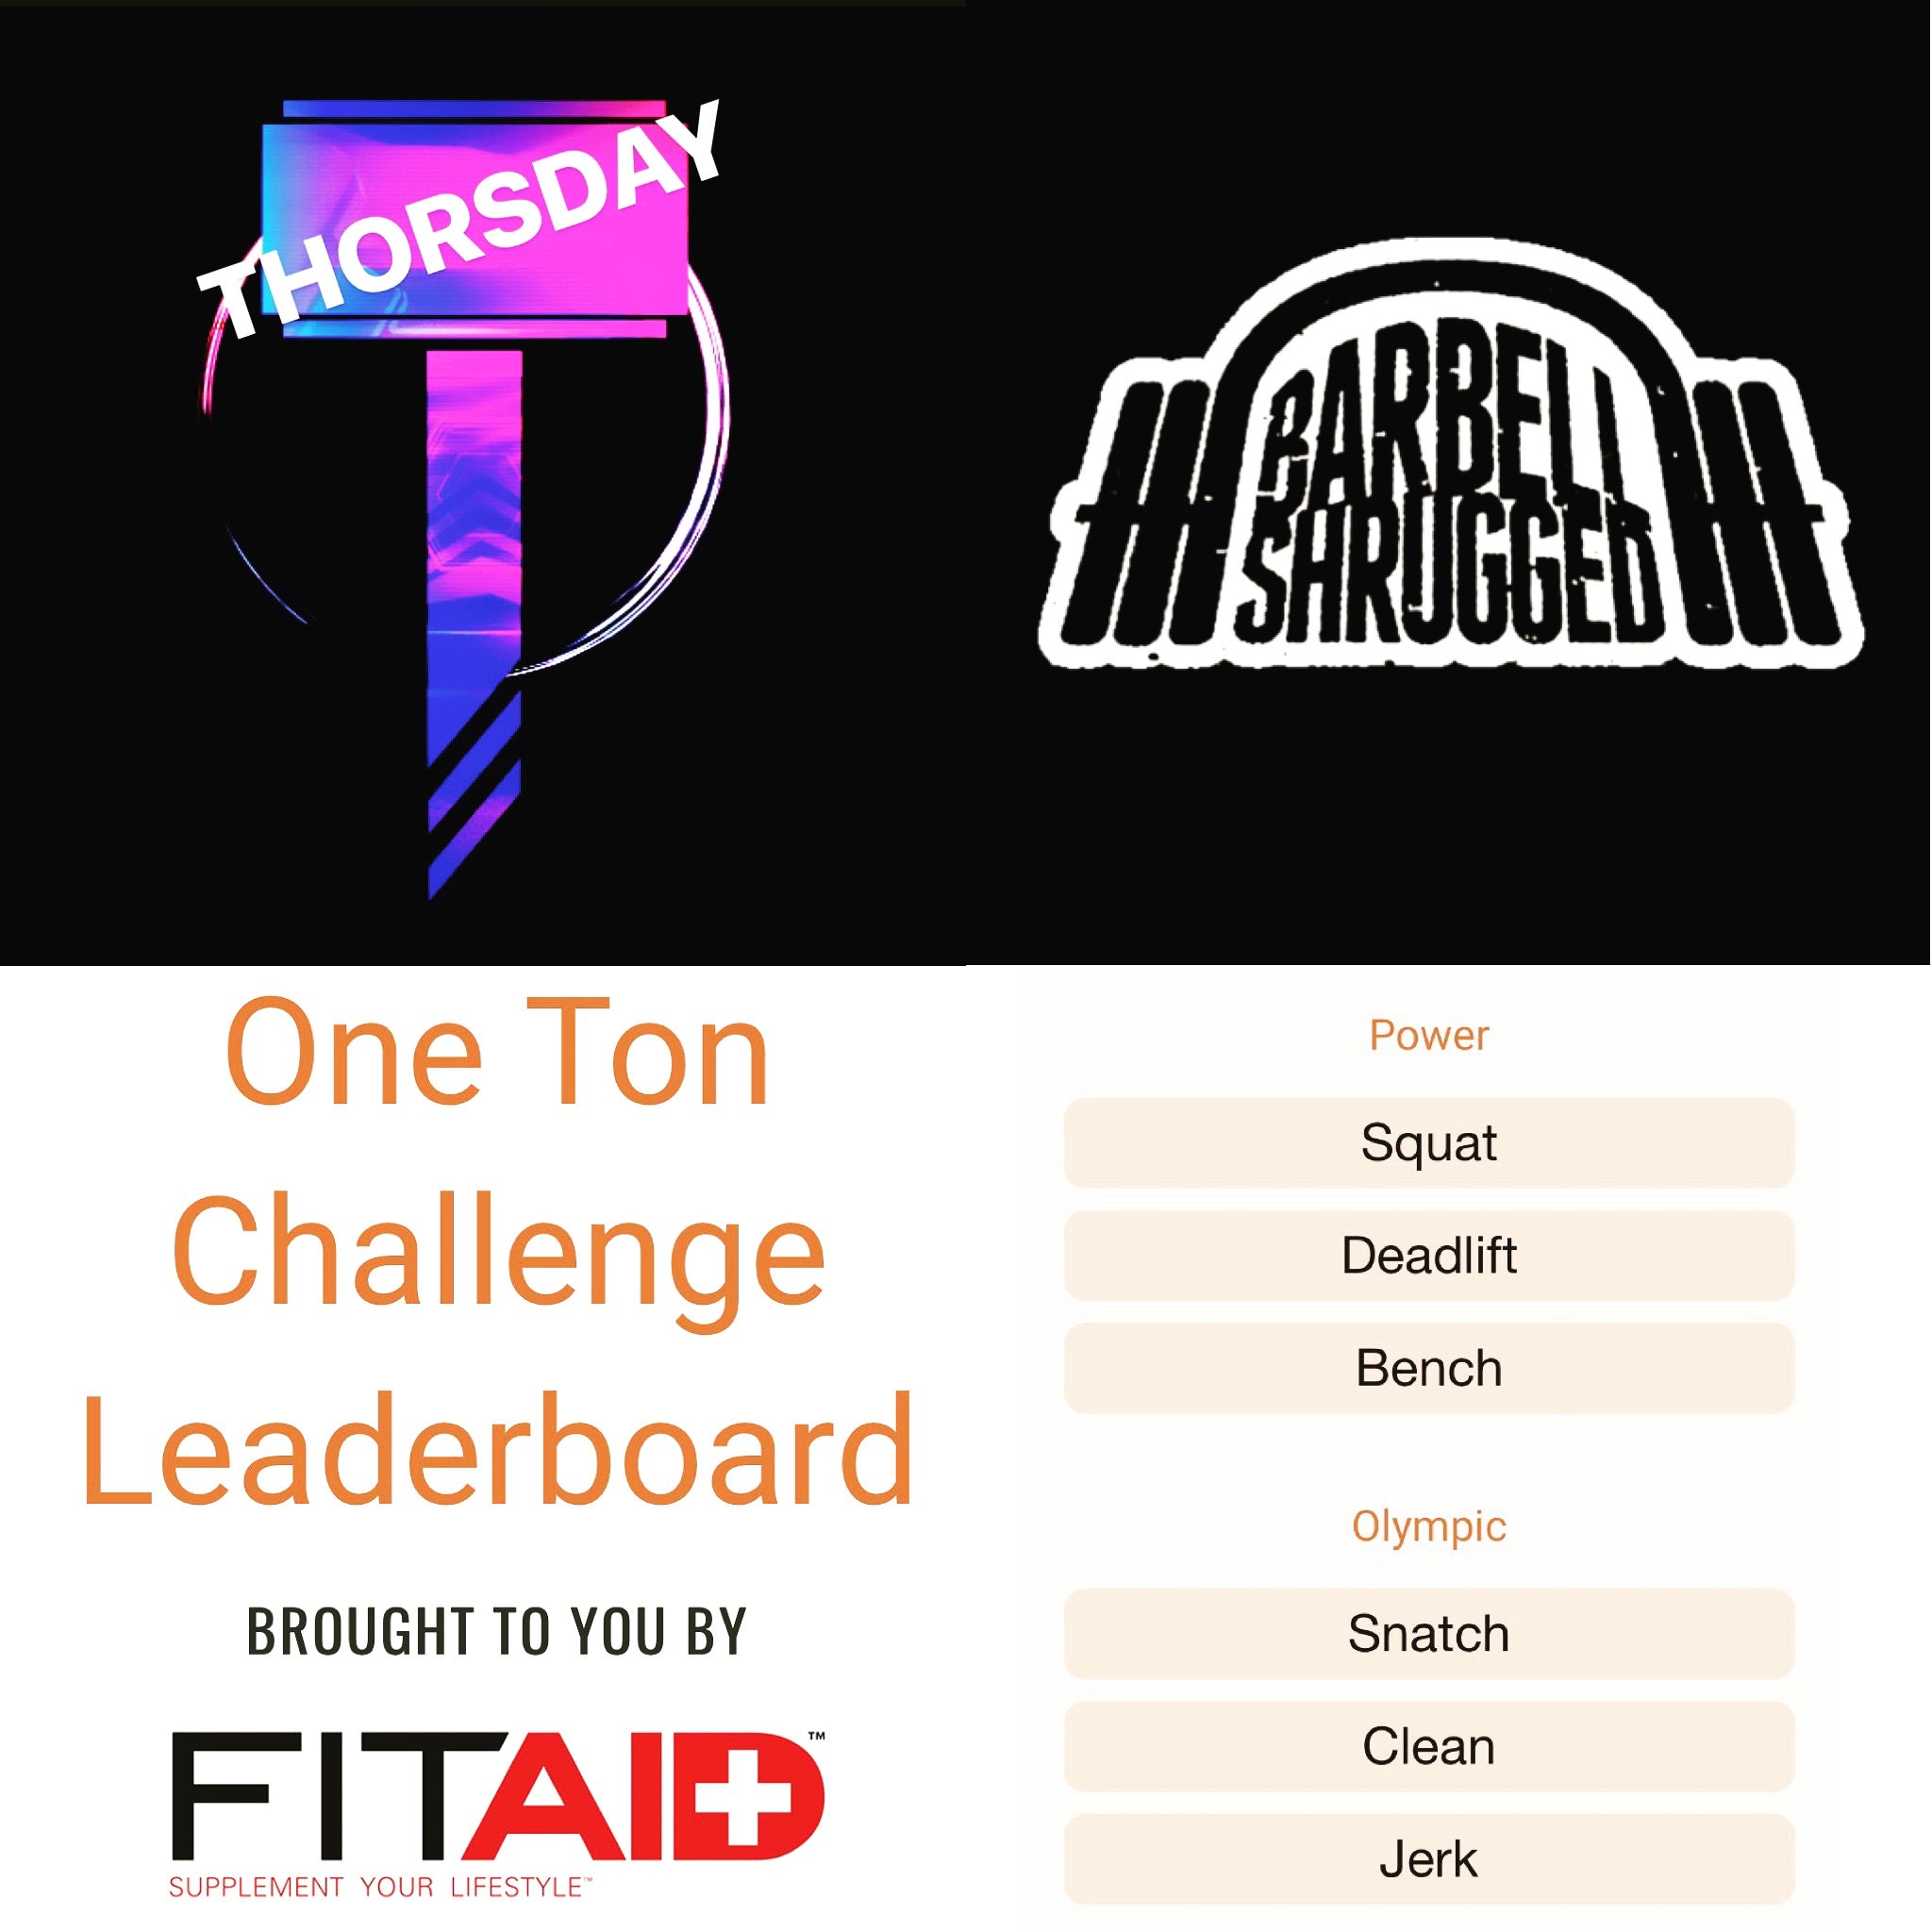 Thorsday 16-05-19 with The Barbell Shrugged Collective and FitAid